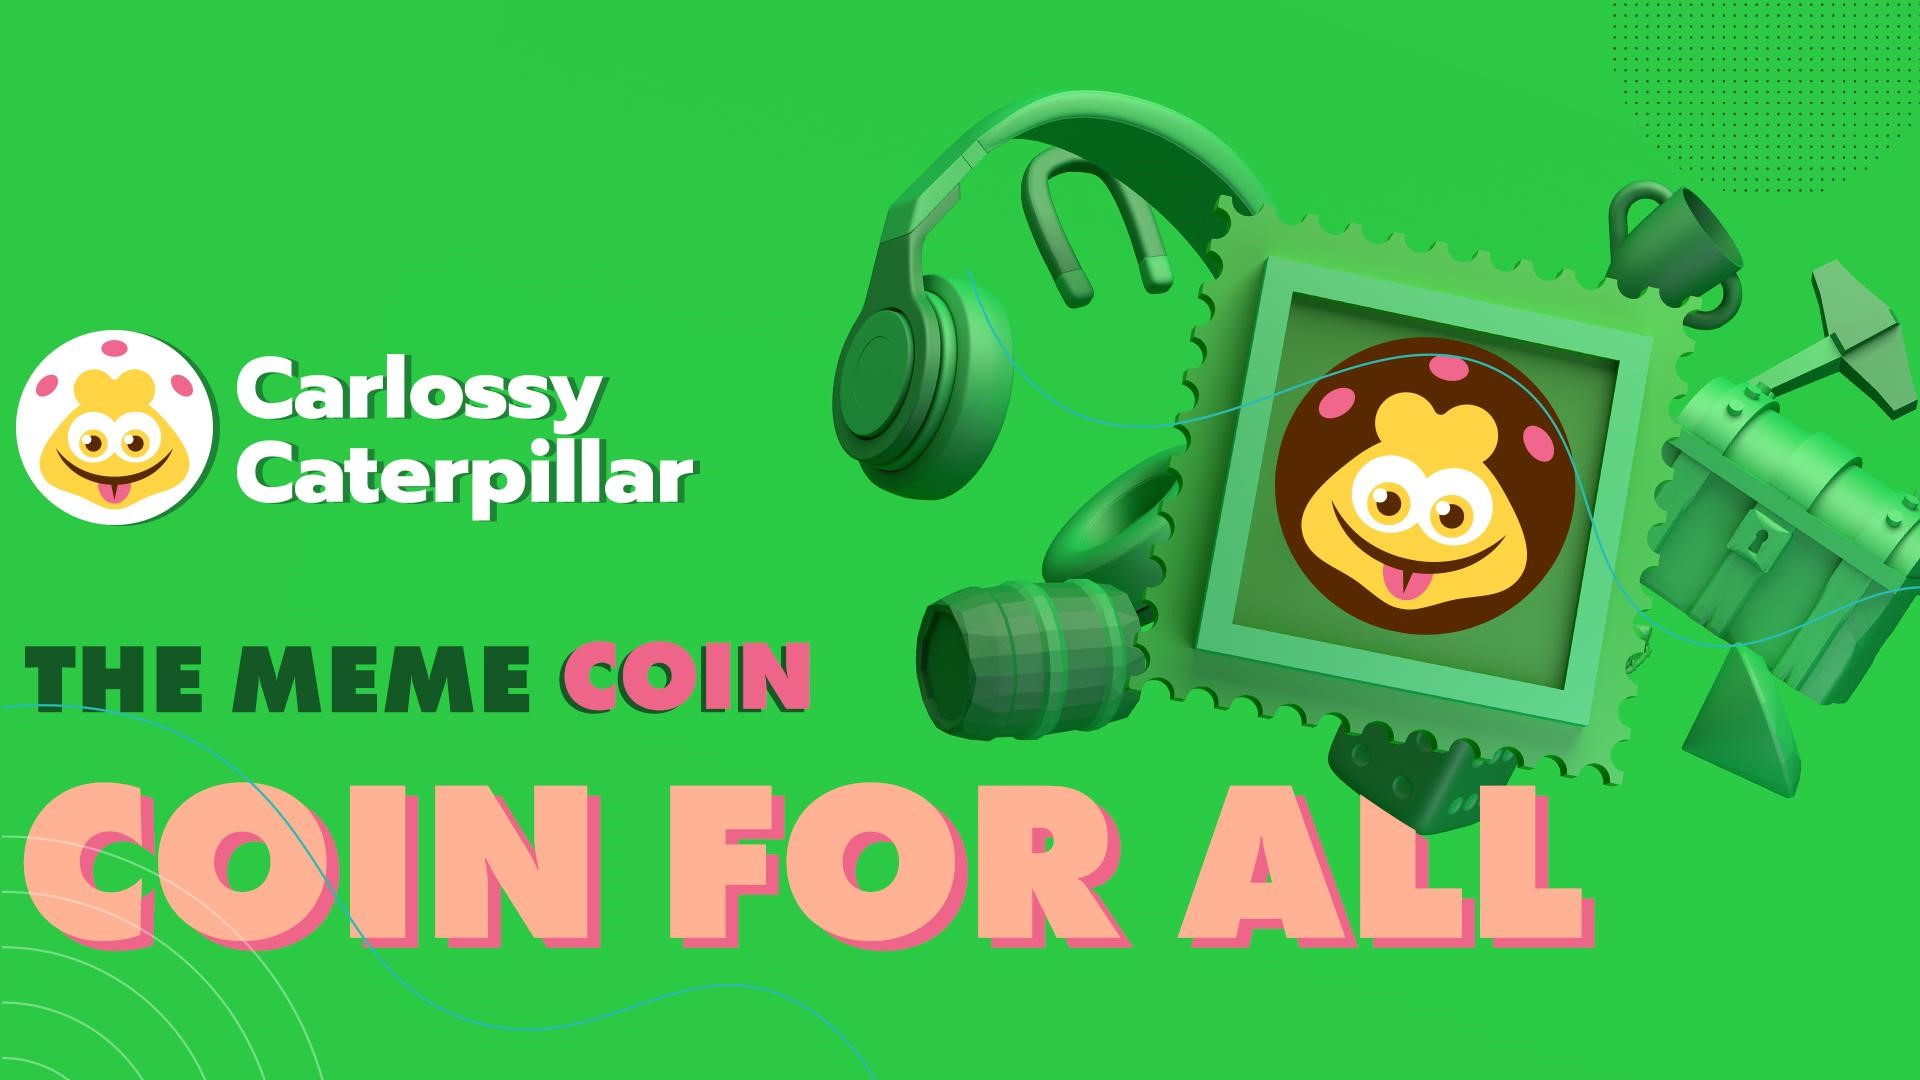 Can Carlossy Caterpillar (CARL) Be Prominent In The Crypto Market Space Like Solana (SOL)